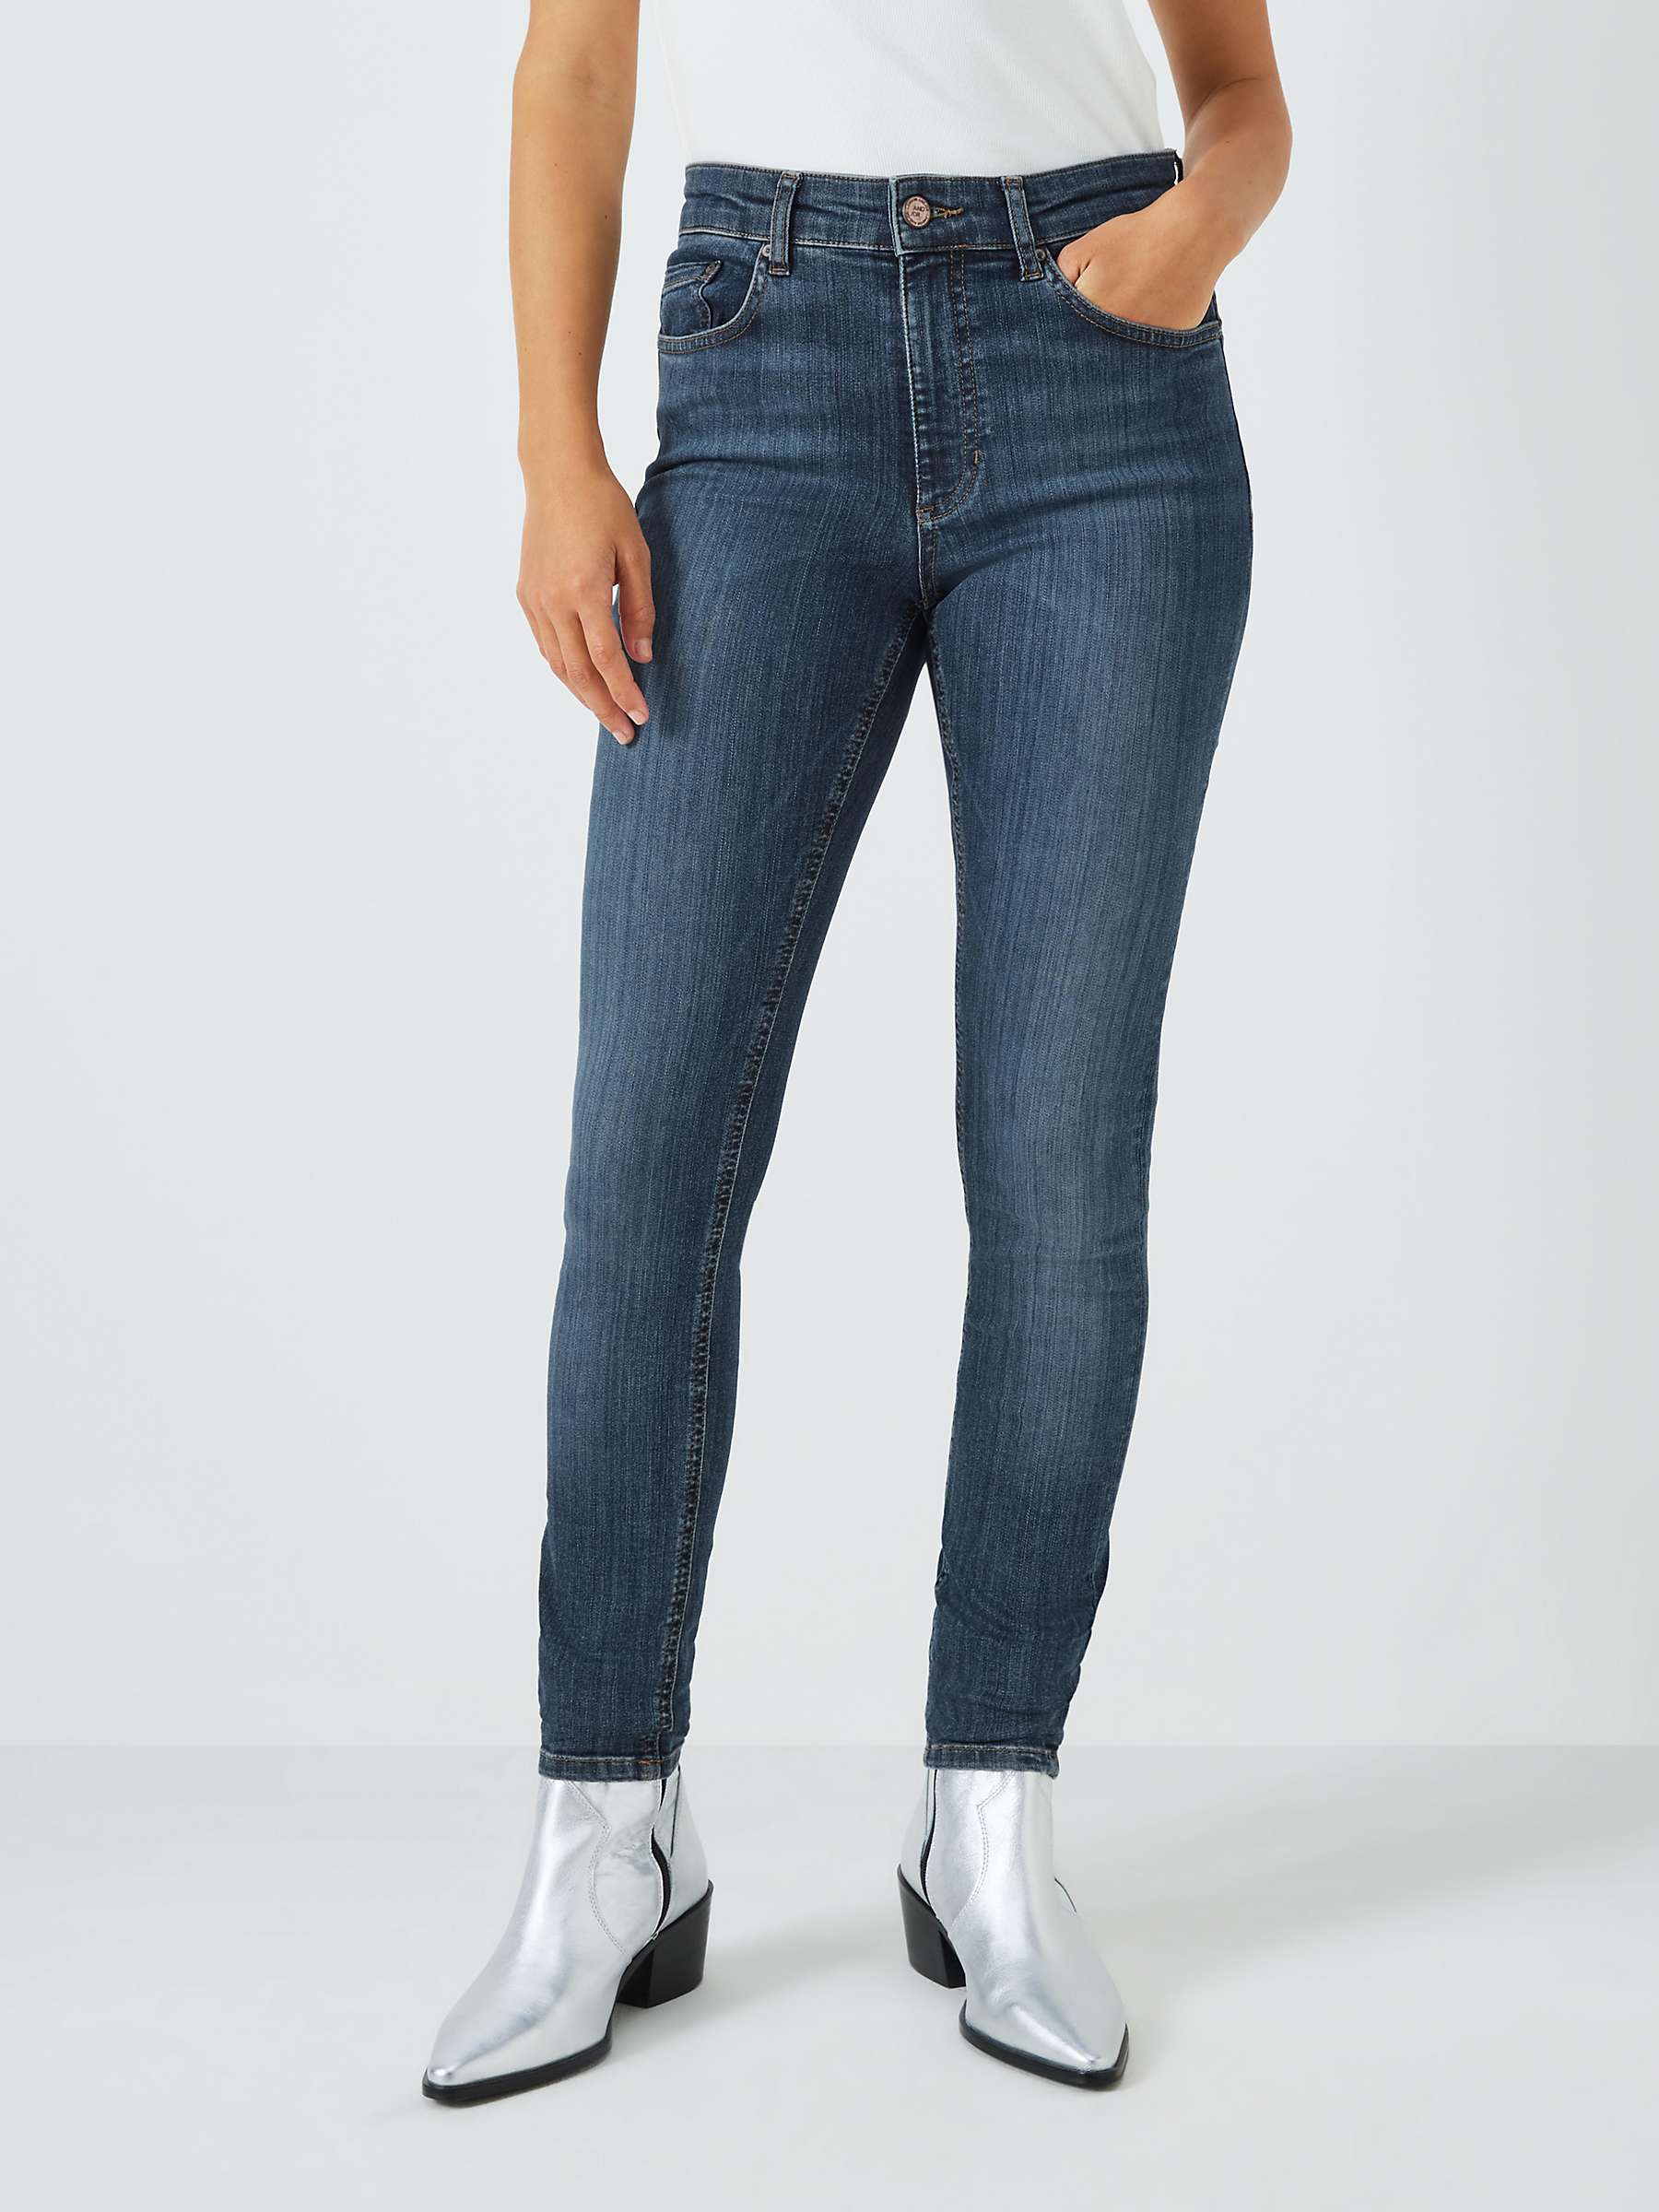 Buy AND/OR Abbott Kinney Skinny Jeans, Vintage Perfected Online at johnlewis.com